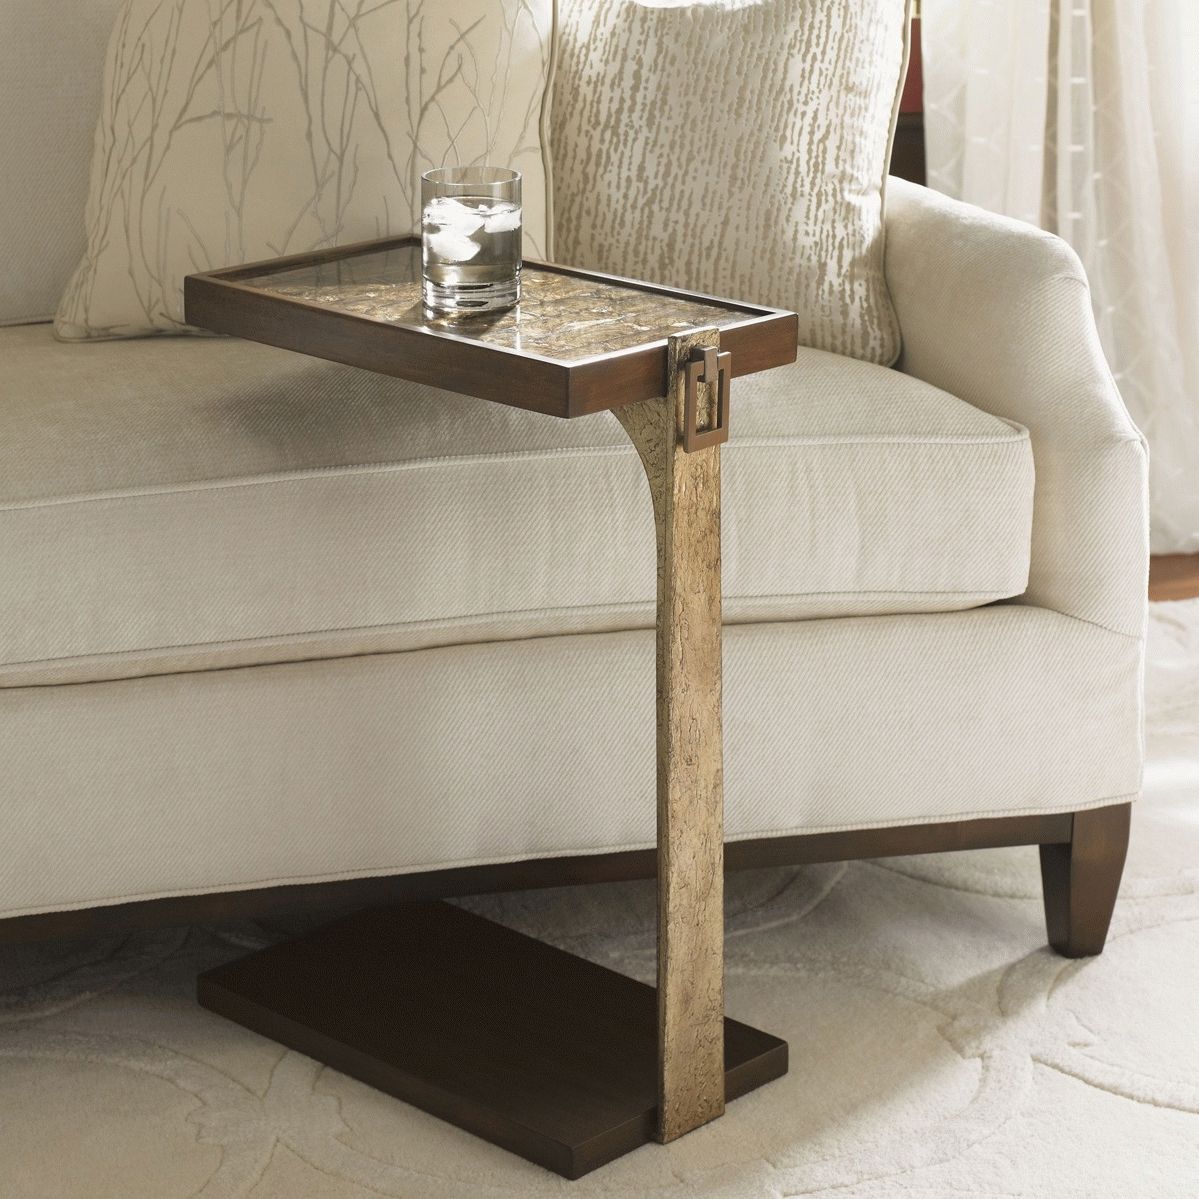 Furniture : Tall Slim End Table Super Small With Drink Holder With Regard To Latest Sofas With Drink Tables (View 5 of 20)